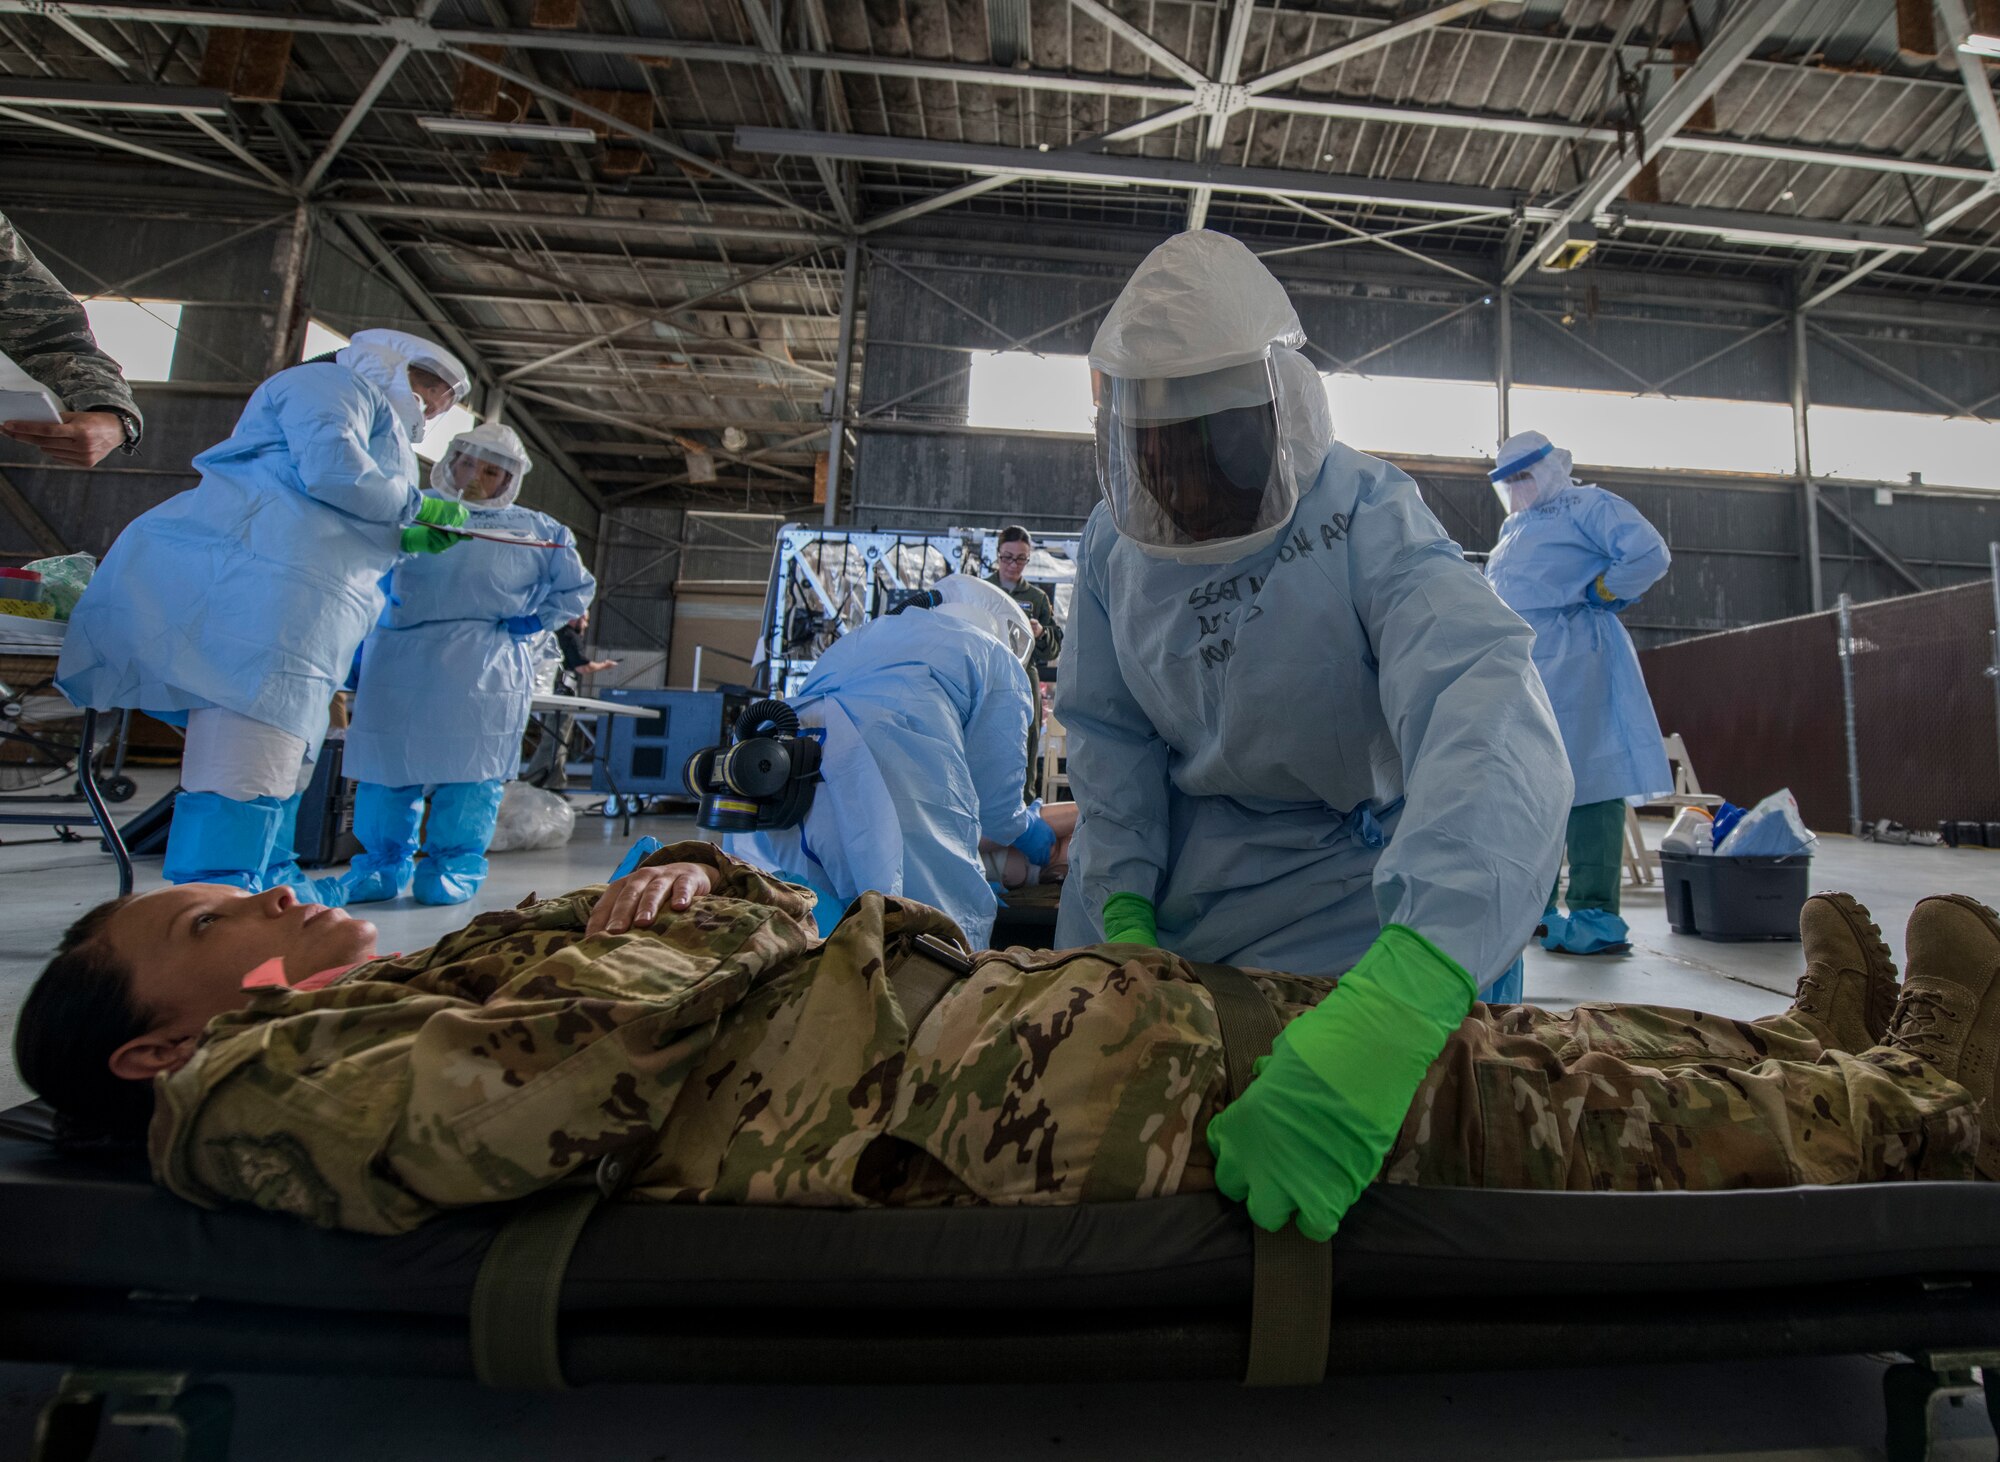 Staff Sgt. Lee Nembhard, an aeromedical evacuation technician assigned to the 375th Aeromedical Evacuation Squadron from Scott Air Force Base, Ill., straps a simulated Ebola patient to a litter during a Transport Isolation System training exercise at Joint Base Charleston, S.C., October 23, 2019. The TIS is a device used to transport Ebola patients, either by C-17 Globemaster III or C-130 Hercules, while preventing the spread of disease to medical personnel and aircrews until the patient can get to one of three designated hospitals in the United States that can treat Ebola patients. JB Charleston is currently the only military installation with a TIS. The TIS mission is a sub-specialty of the aeromedical evacuation mission which requires frequent training to maintain readiness.